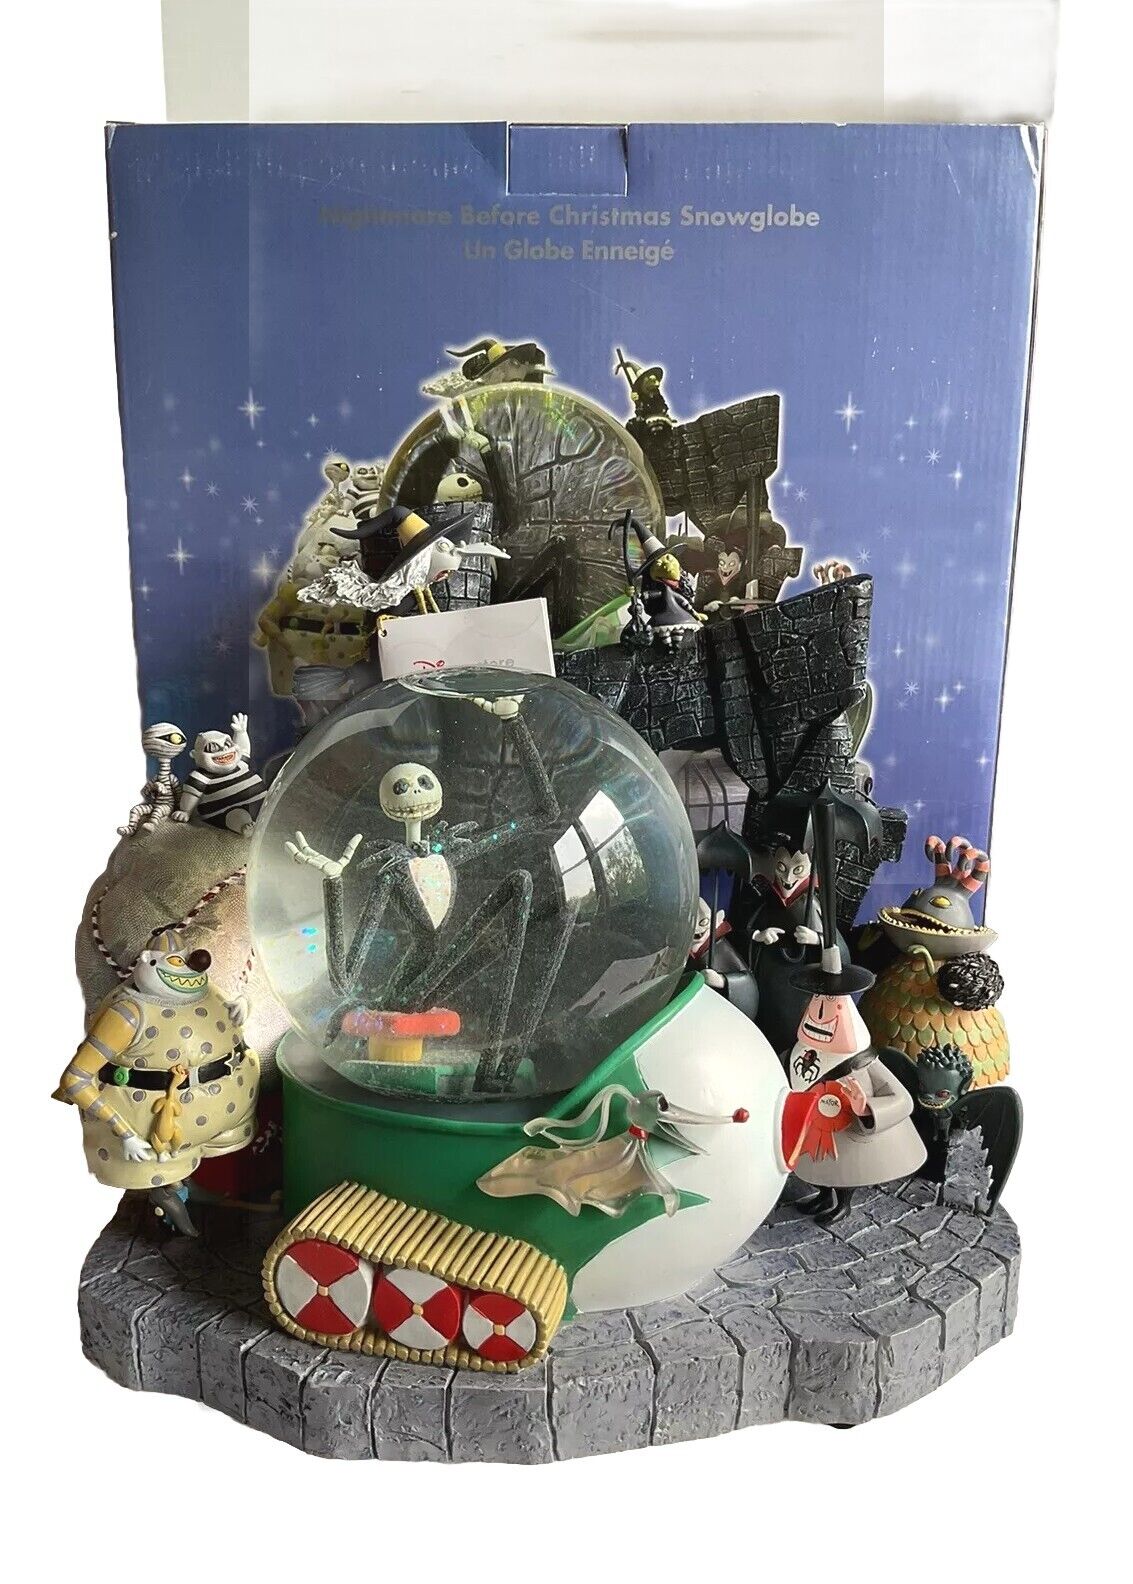 Nightmare Before Christmas Snowglobe Disney Store 1993 Vintage Collectible RARE